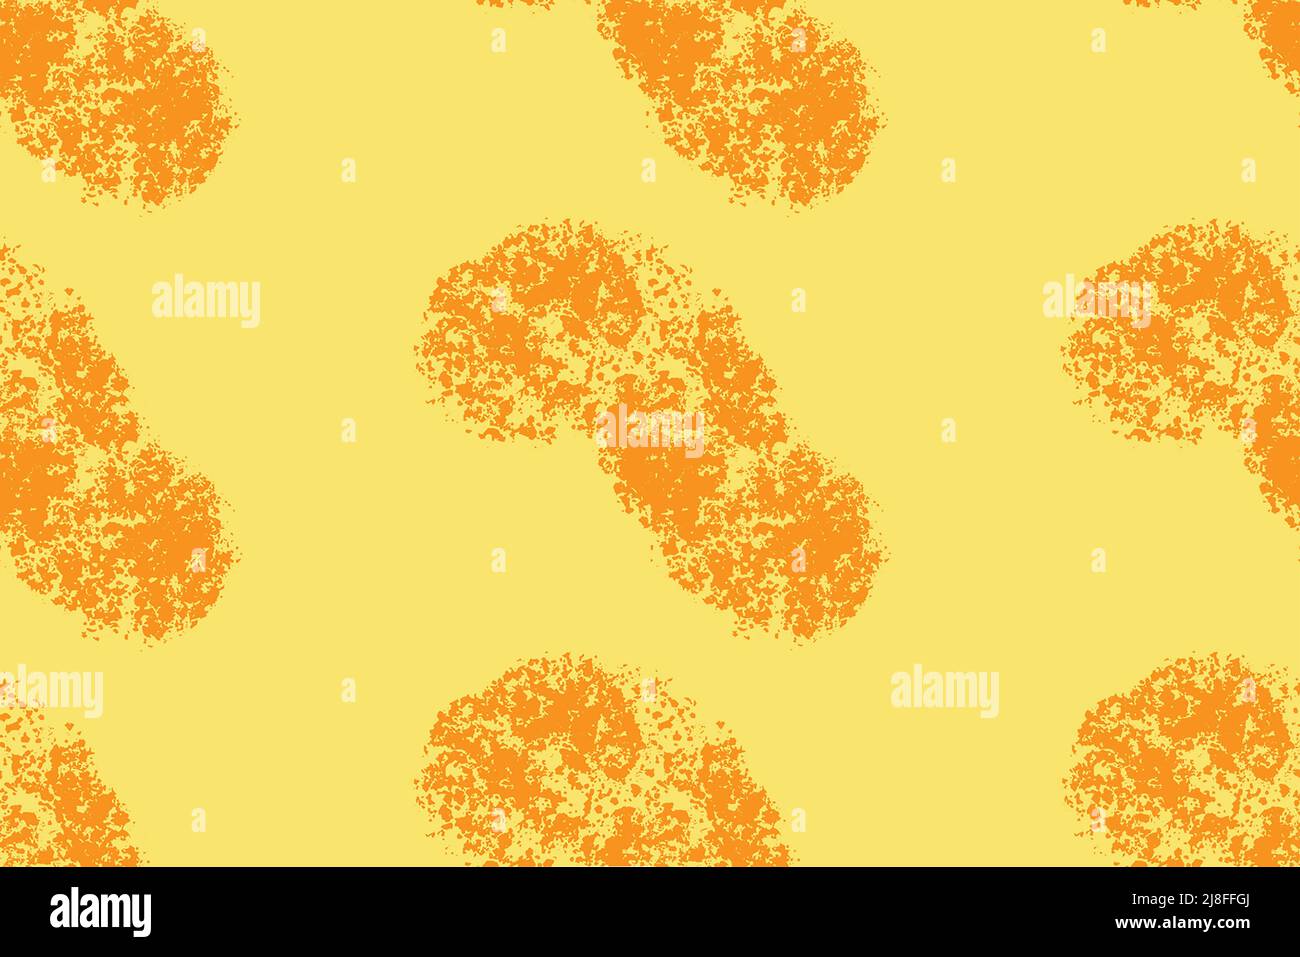 Bright orange patches on a yellow background. Abstract repeating pattern. Stock Photo